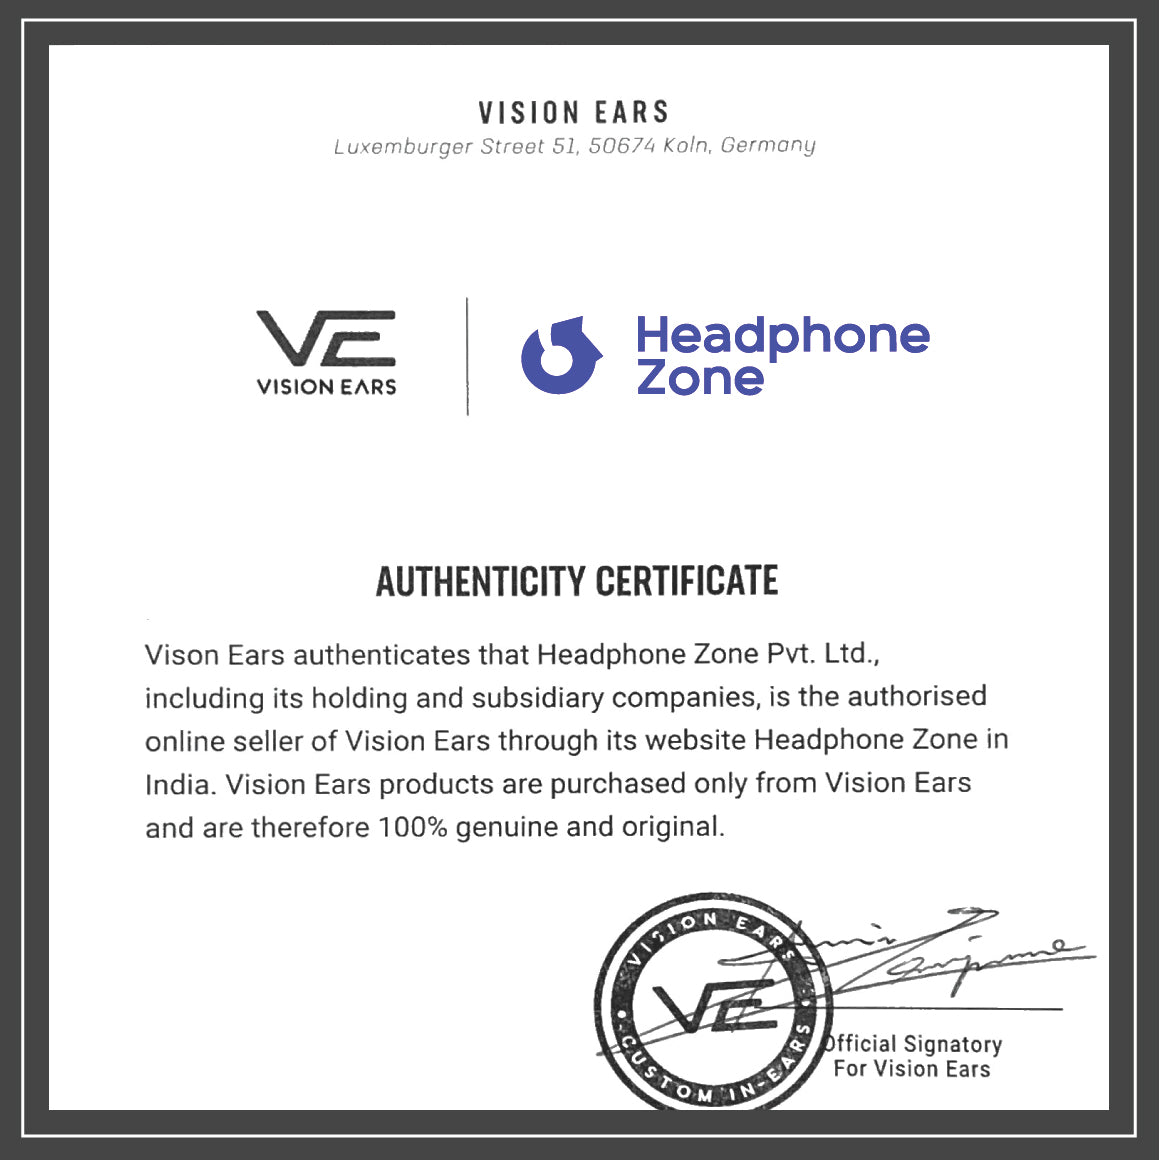 Vision Ears Authenticity Certificate 01